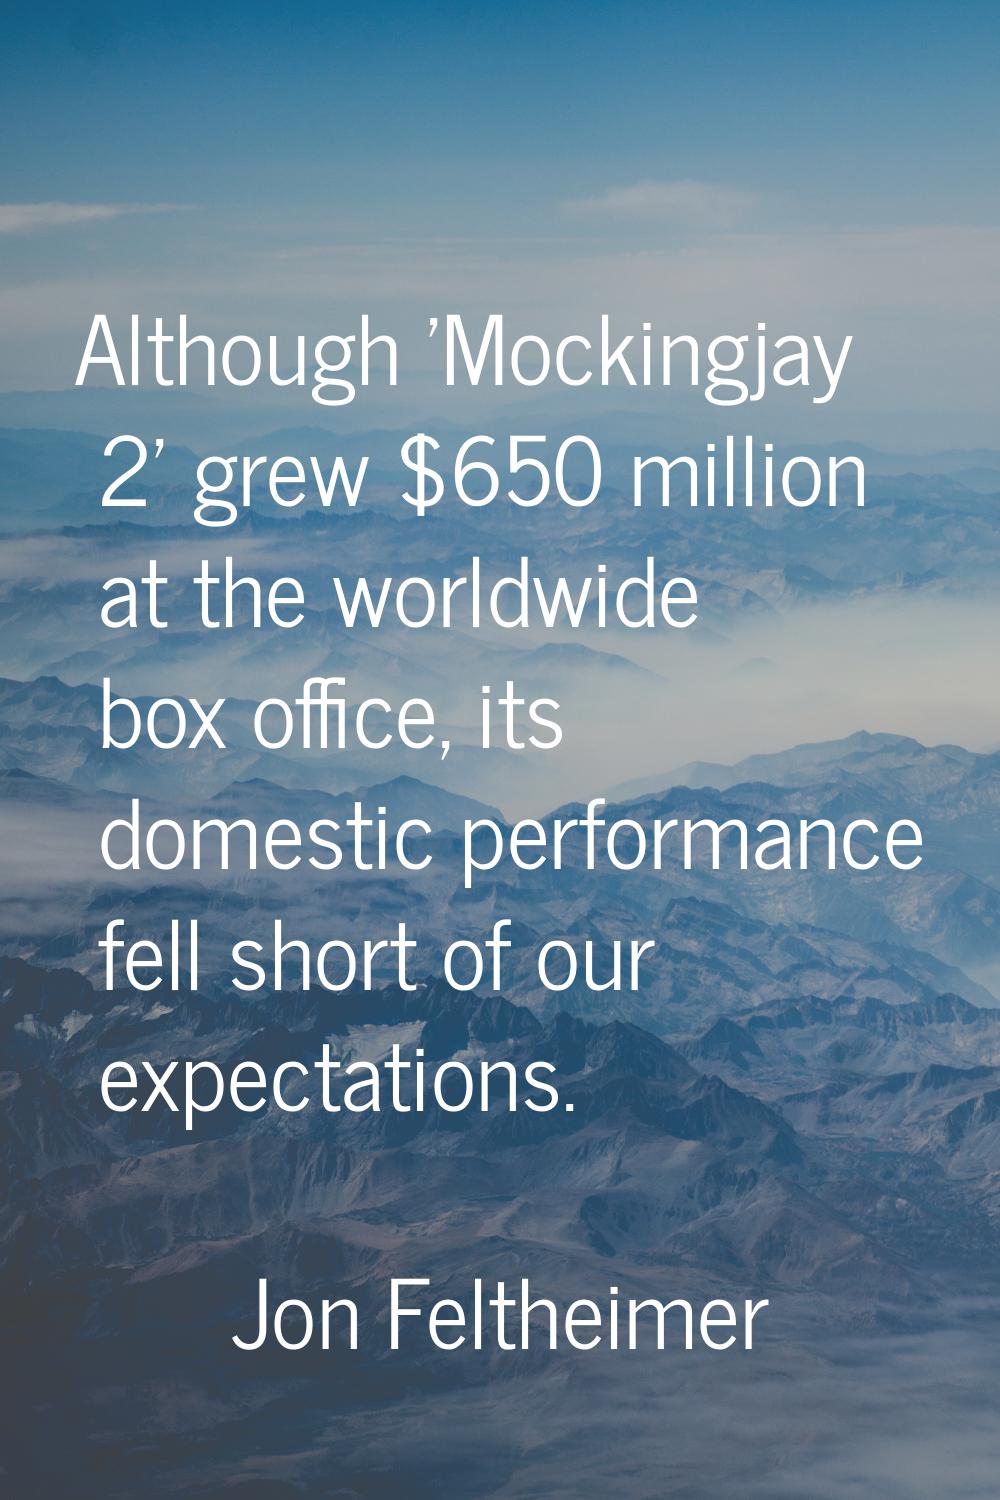 Although 'Mockingjay 2' grew $650 million at the worldwide box office, its domestic performance fel